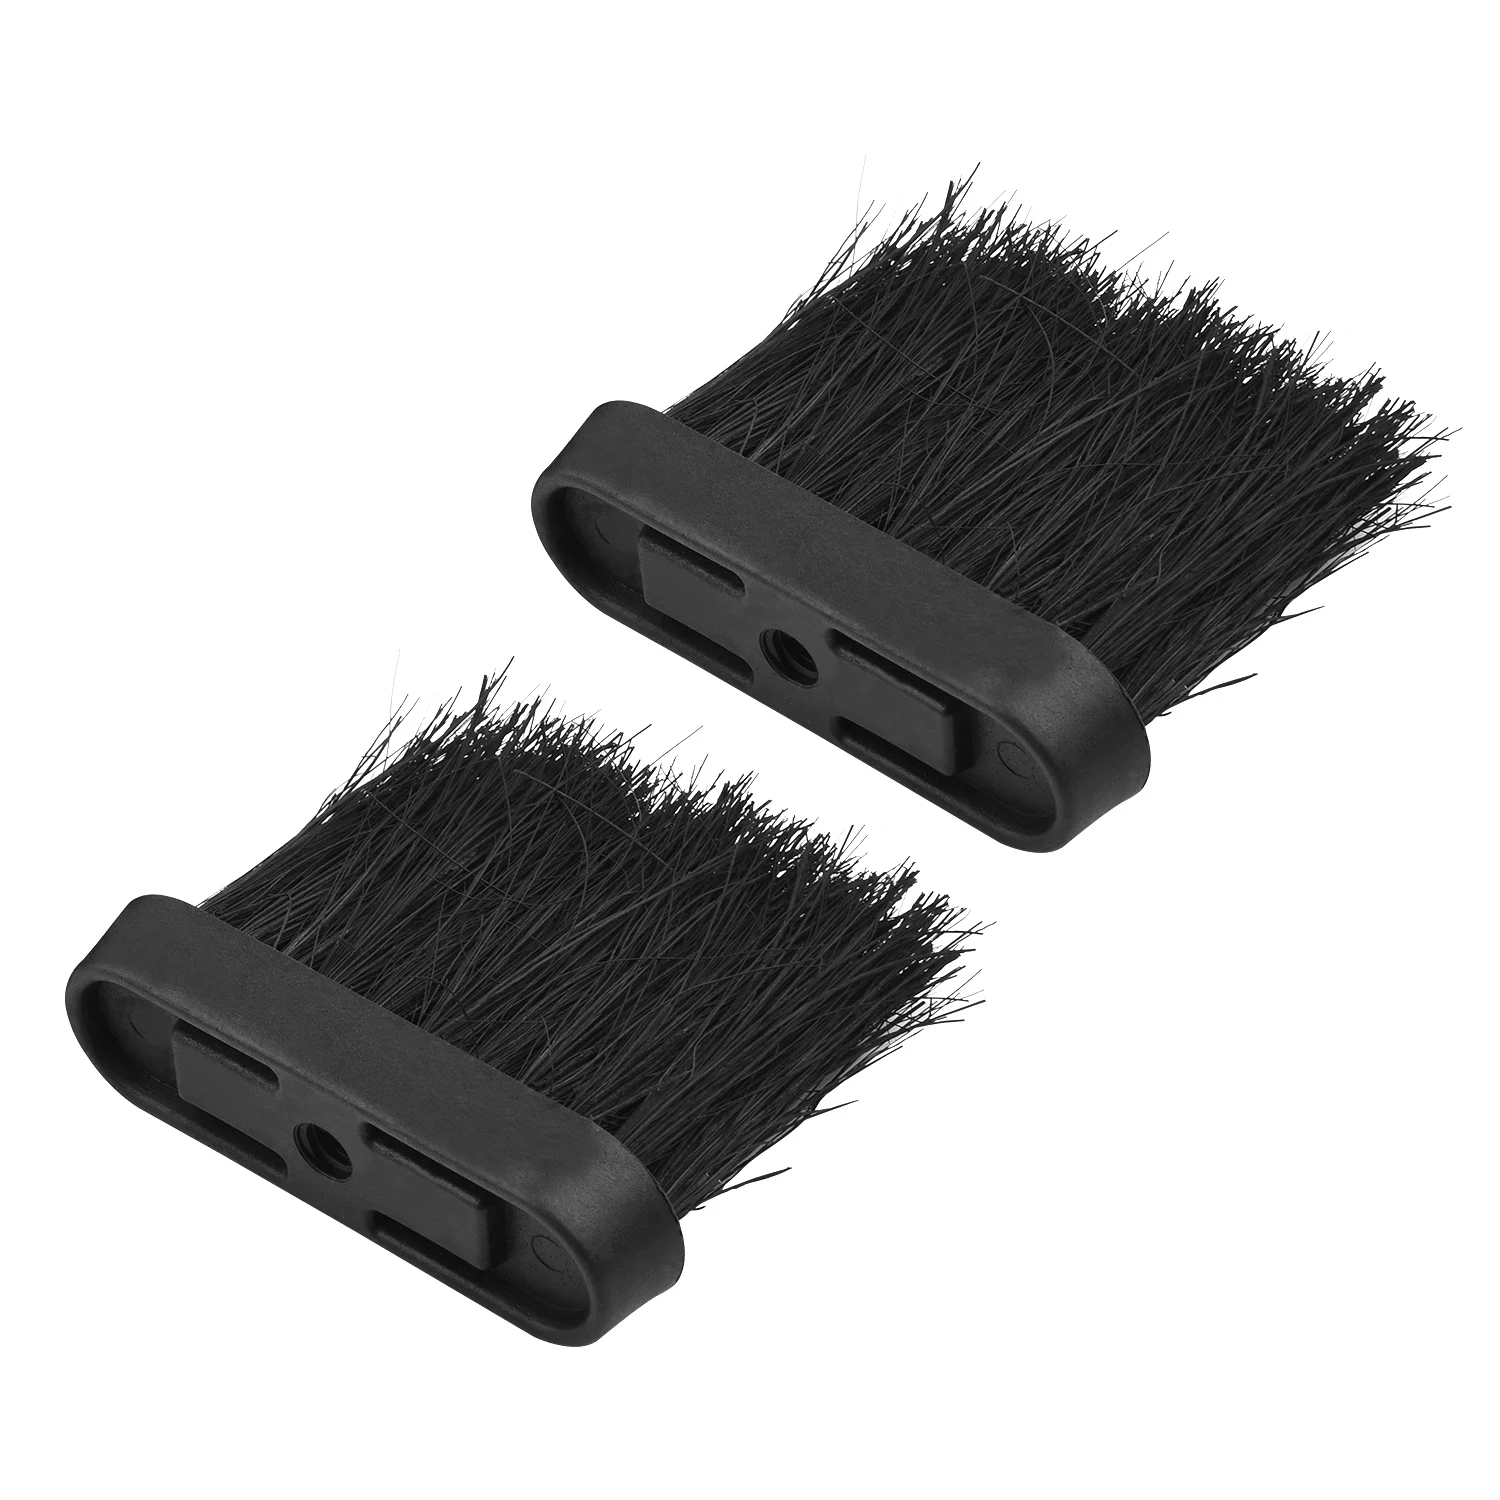 cleaning brushes fireplace brush black brush head fire hearth fireplace fireside refill cleaning square home brand new Durable High Quality Hot New Home Fireplace Brush Hearth Brushes Black Accessories Cleaning Companion Fire Tools